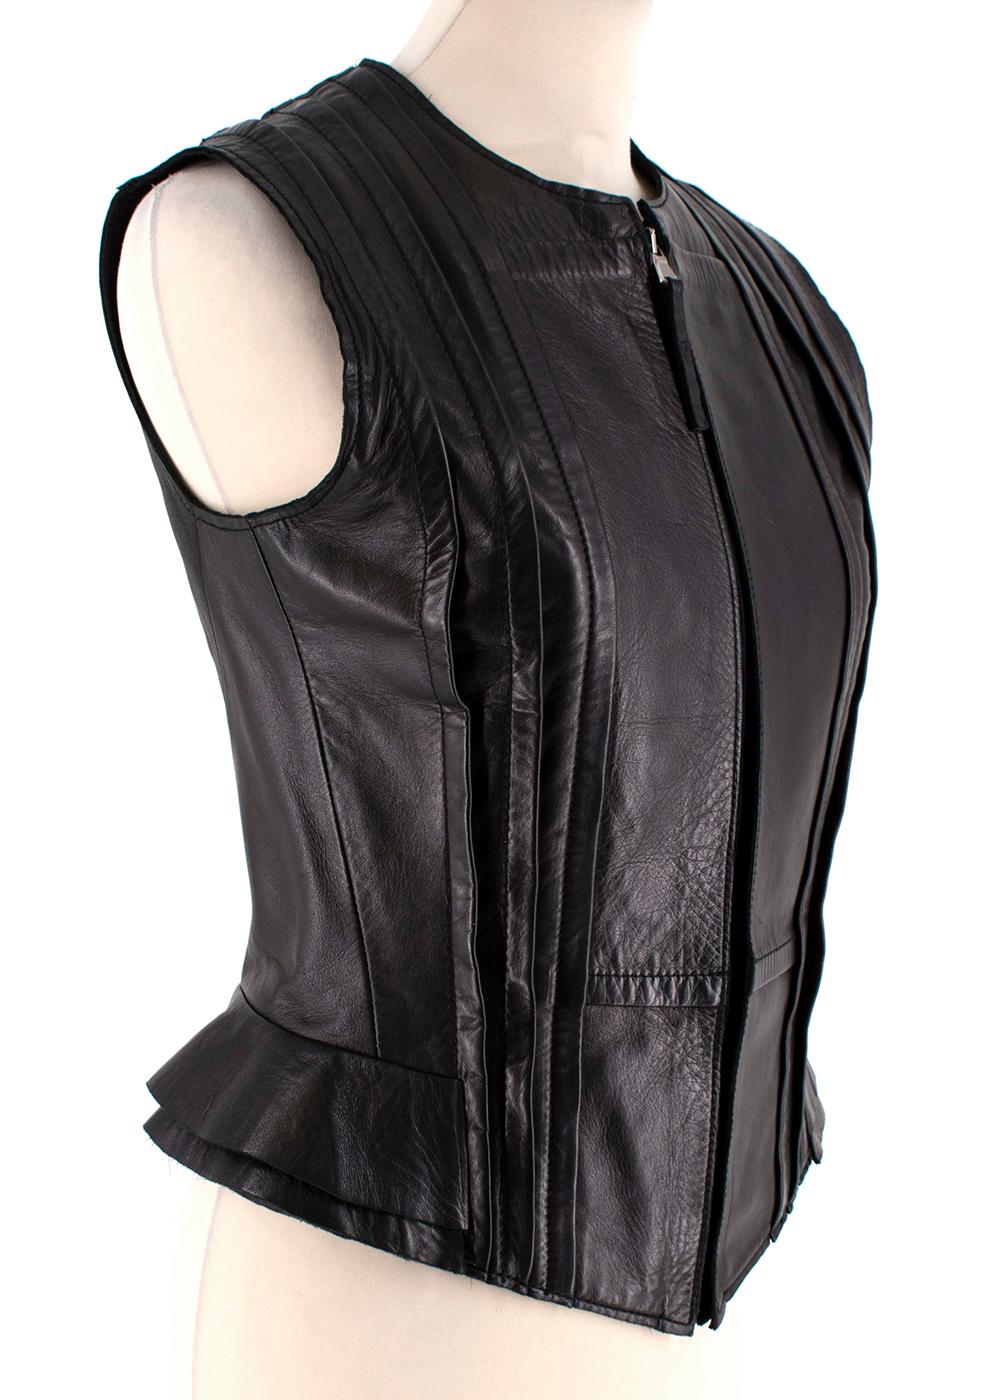 Balenciaga Fitted Dark Brown Leather Sleeveless Vest  

- Fitted
- Tailored Soft Folds 
- Hem Structure and Layer Detailing 
- Centre Zip Fastening 
- Fully Lined 
- Round Neckline
- Single Vent 

Material:
- 100% Lambskin Leather 
- 100% Viscose